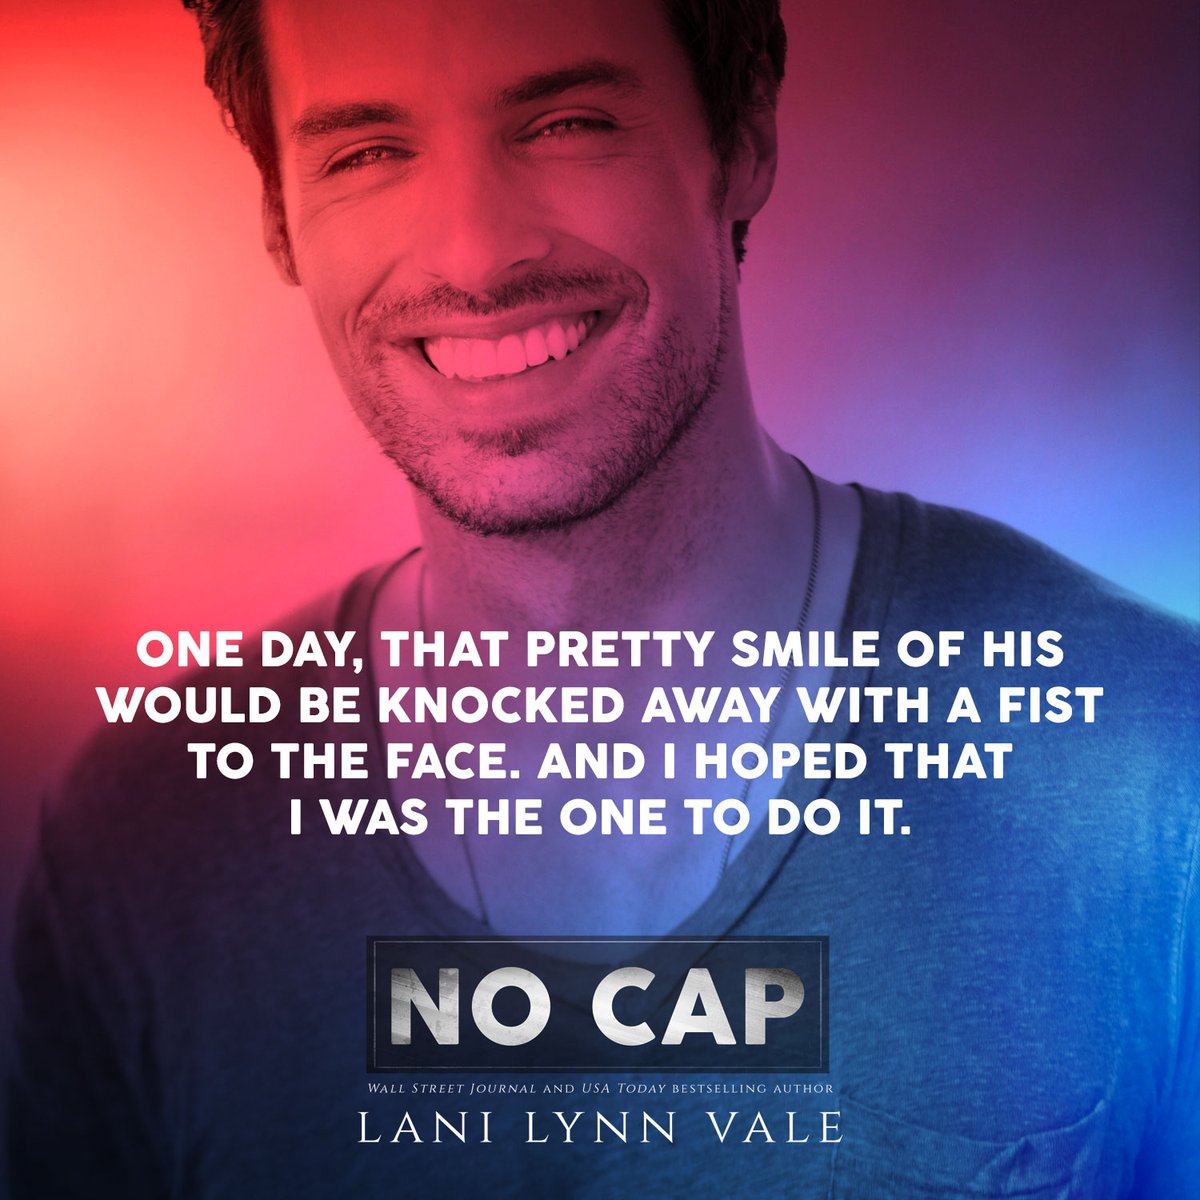 #NEW “What an amazing start to a new series! I could not get enough of this book! I was hooked immediately and didn’t want to put it down!” No Cap by Lani Lynn Vale #CarterBrothers bit.ly/4dmXn5h #Review: tinyurl.com/bp6kwmn3